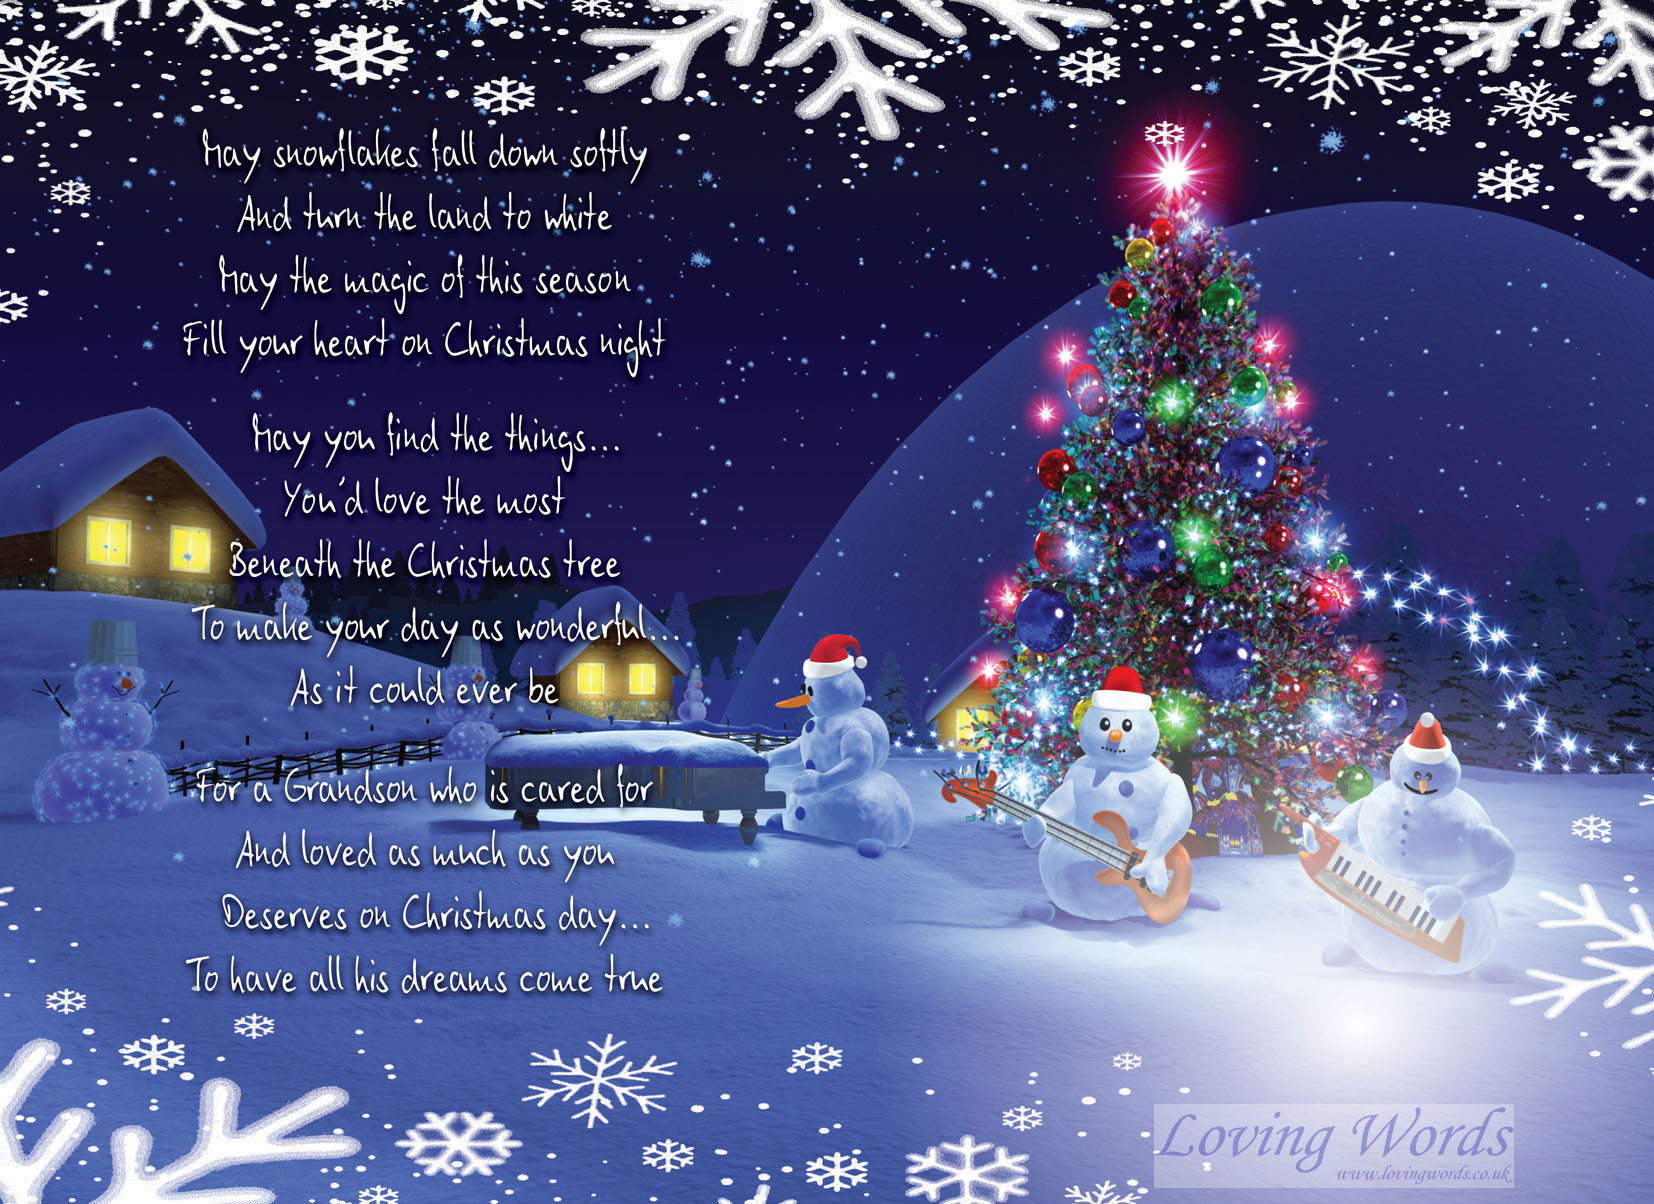 Special Grandson at Christmas | Greeting Cards by Loving Words